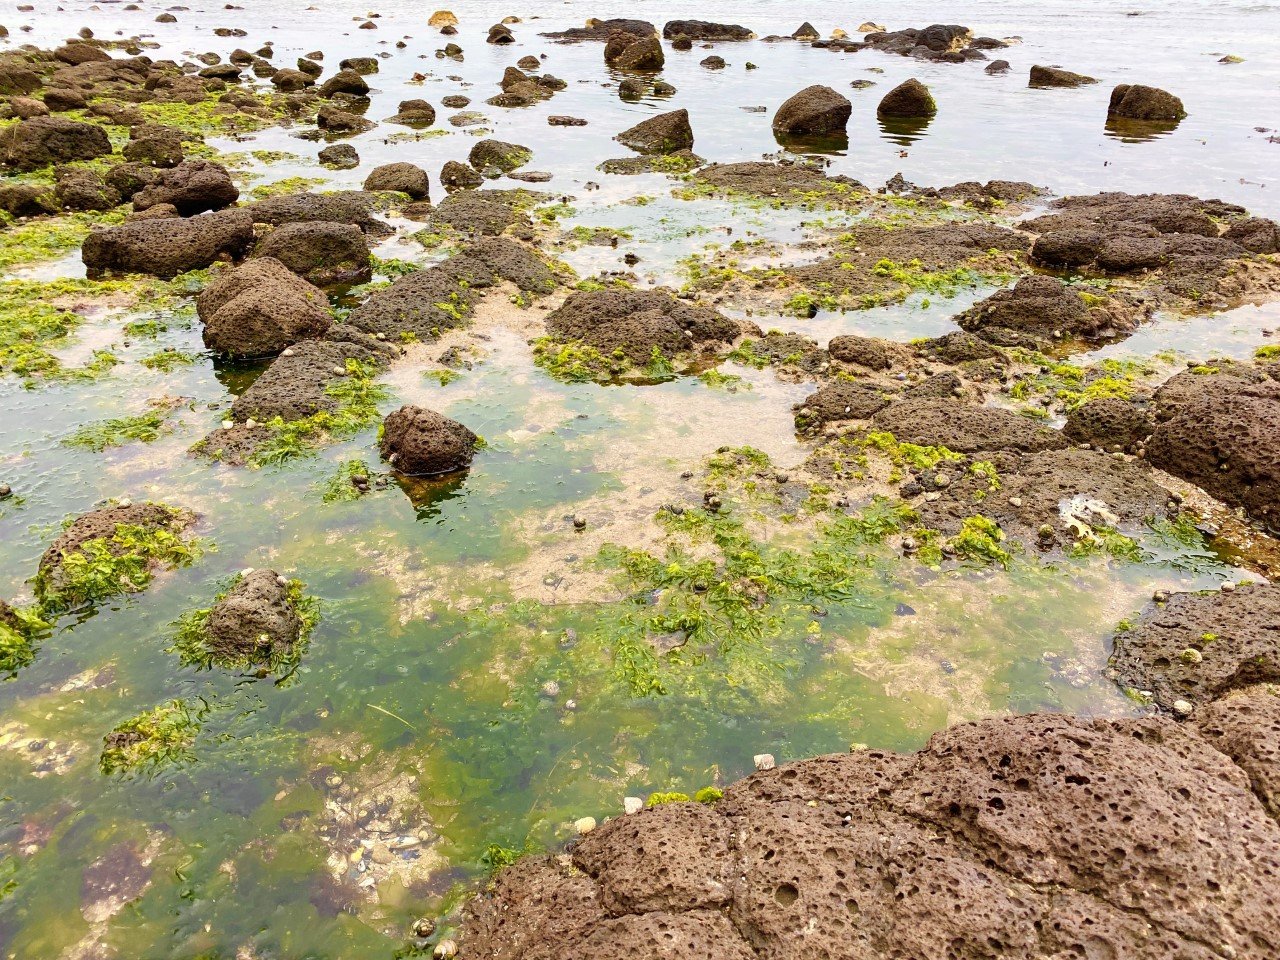 Small rockpools at Point Cook